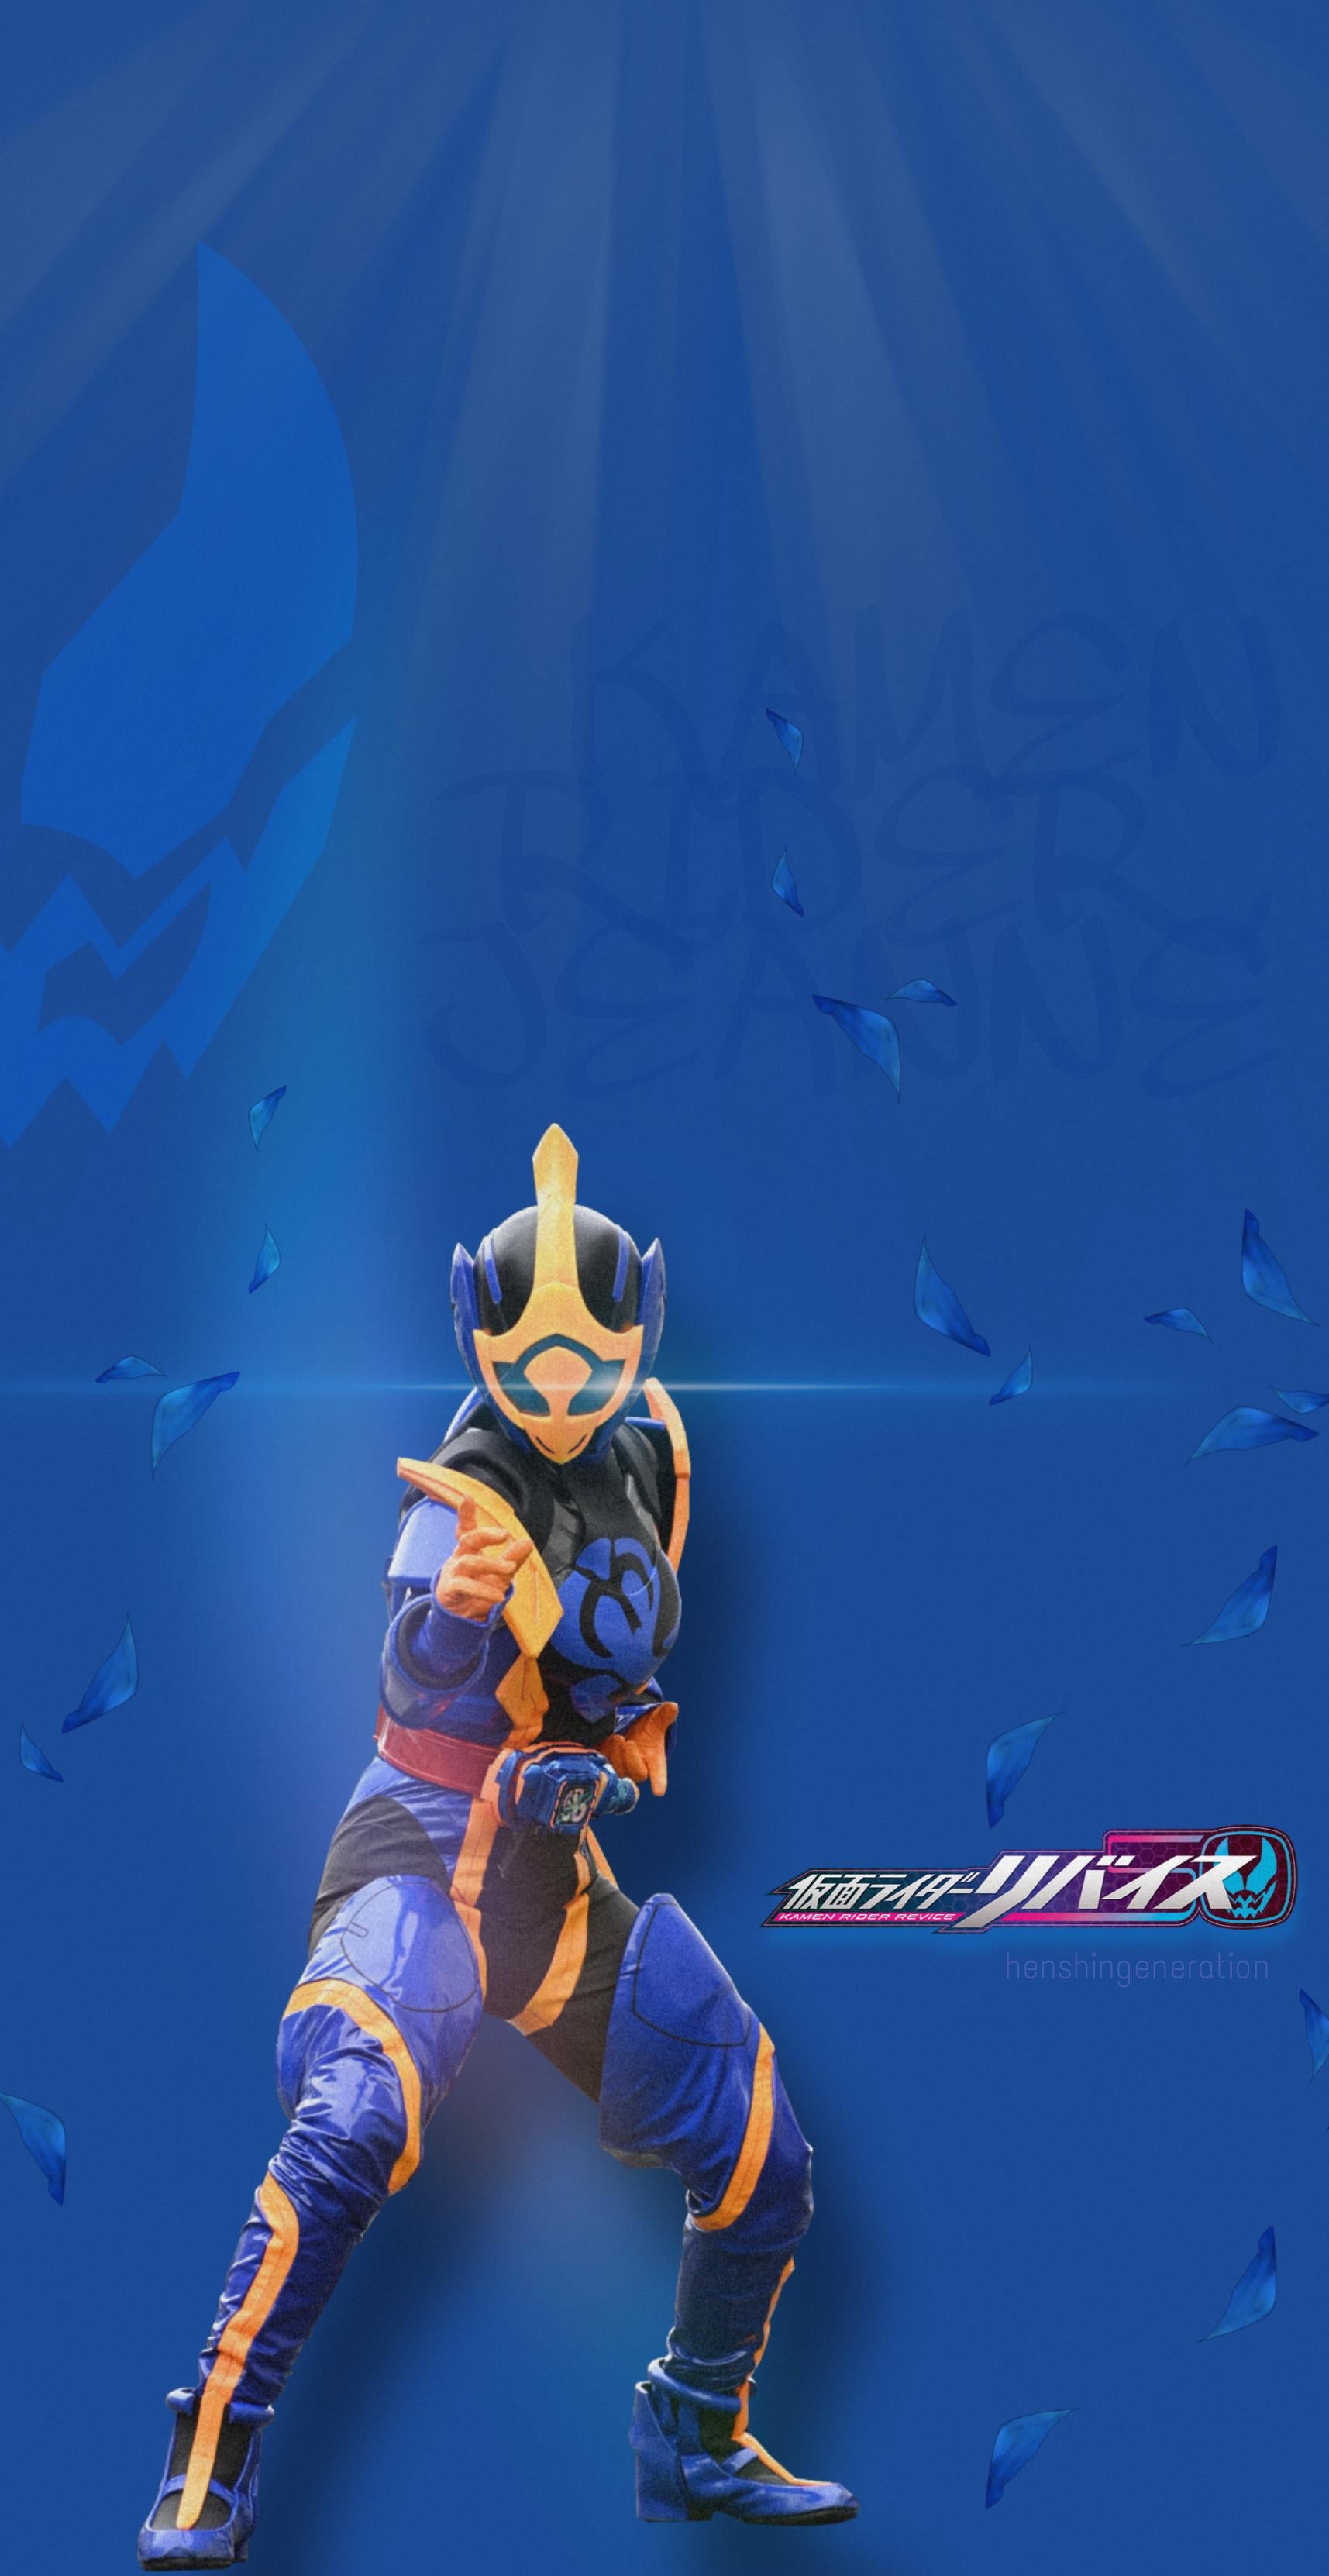 Kamen Rider Jeanne Phone Wallpaper made by me! HenshinGeneration is my , do give it a follow!